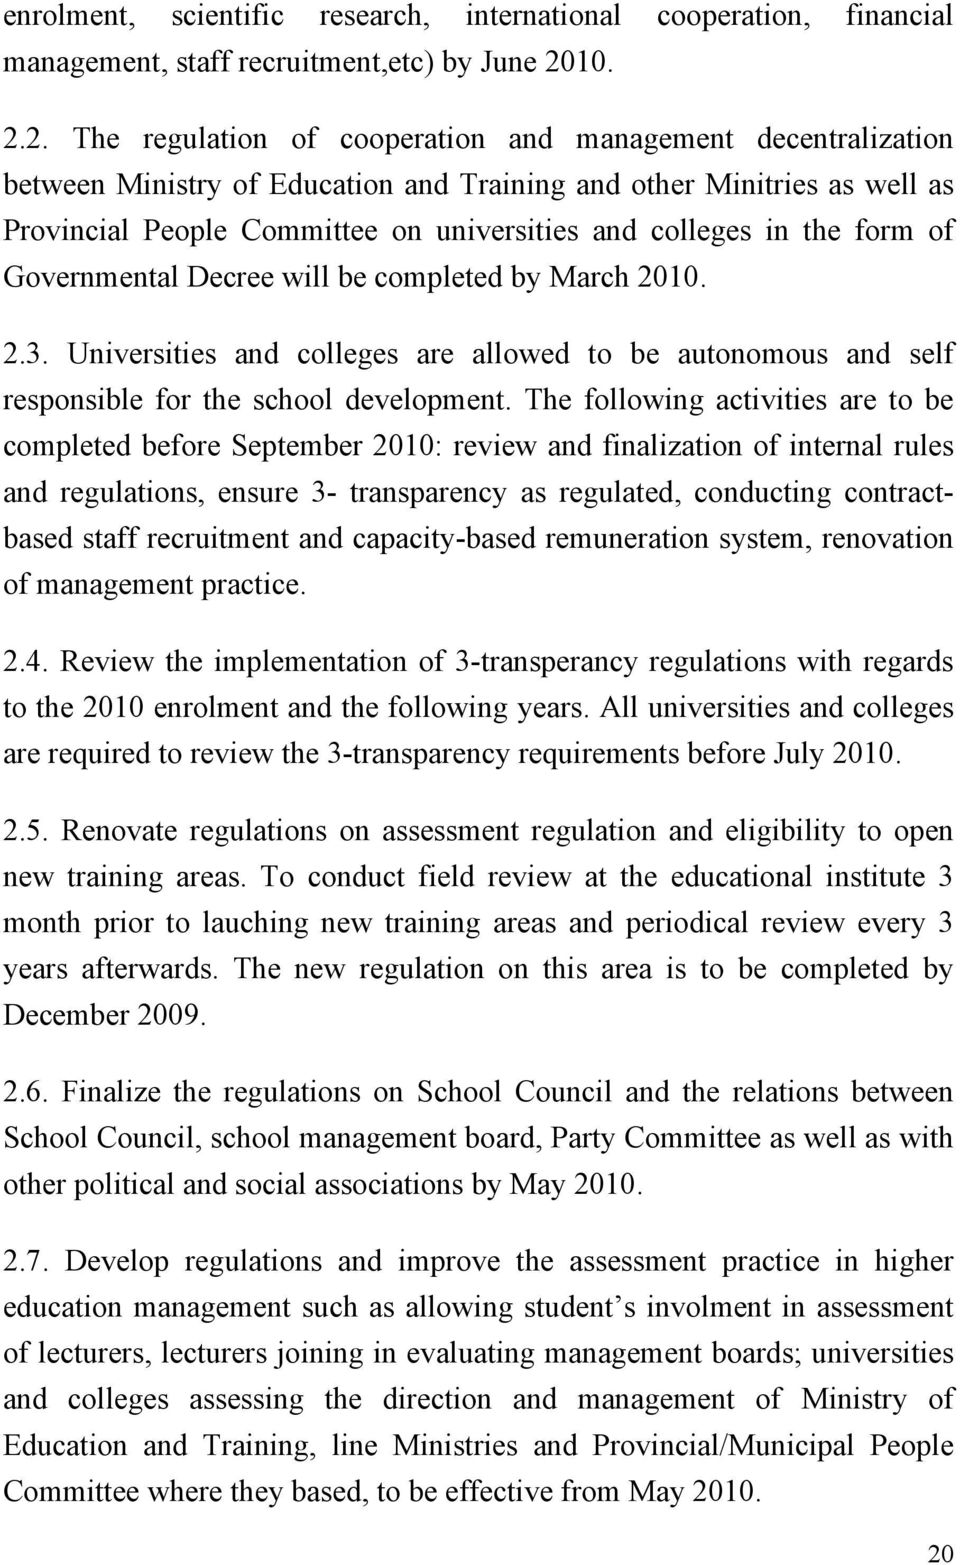 2. The regulation of cooperation and management decentralization between Ministry of Education and Training and other Minitries as well as Provincial People Committee on universities and colleges in